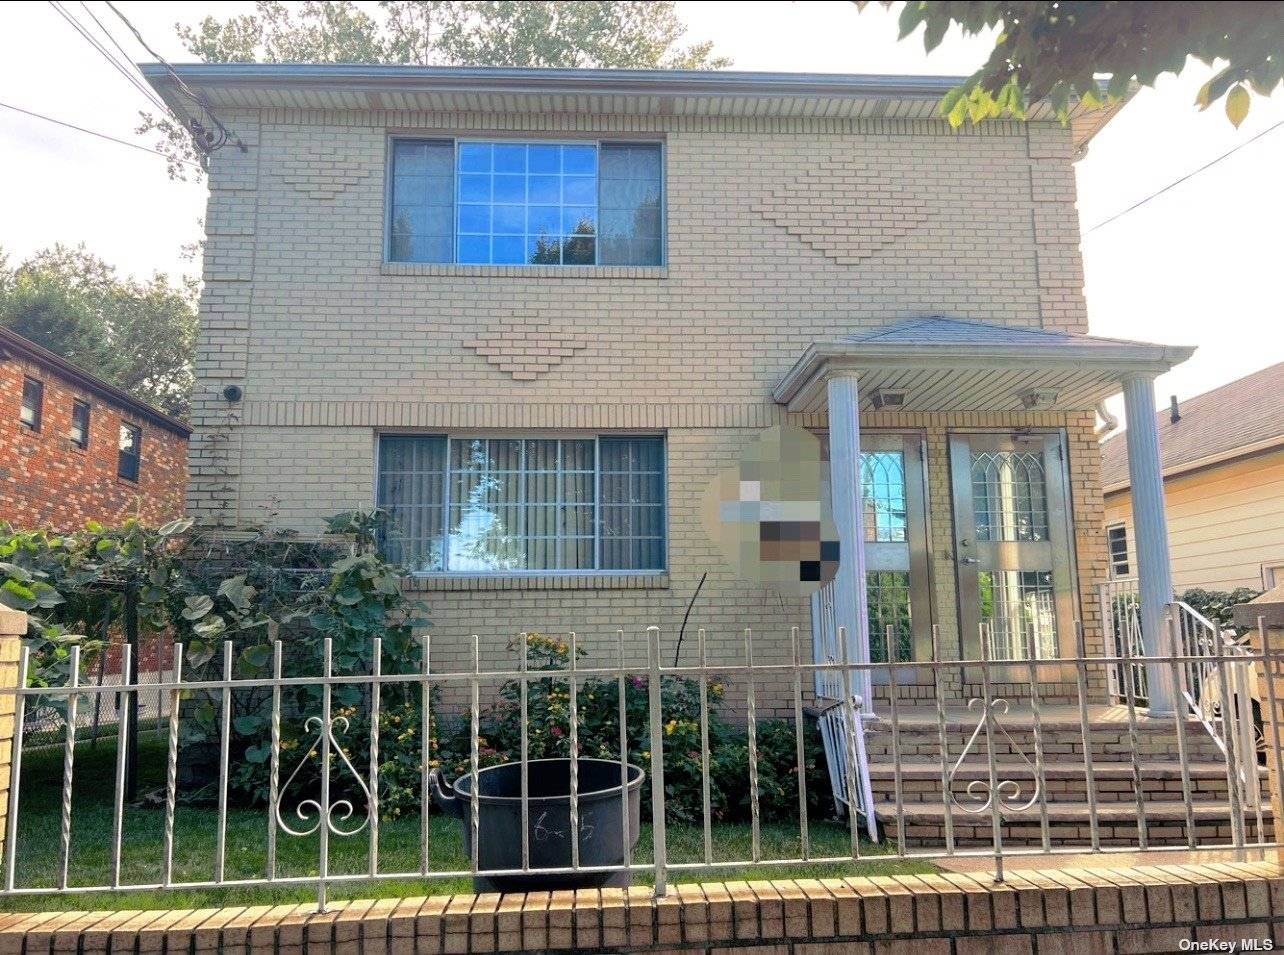 Young solid brick and detached legal huge two family house in College Point, 4500 sqft lot size, building size 24X52, 3 bedrooms with 2full bathrooms on each floor, full finished ...